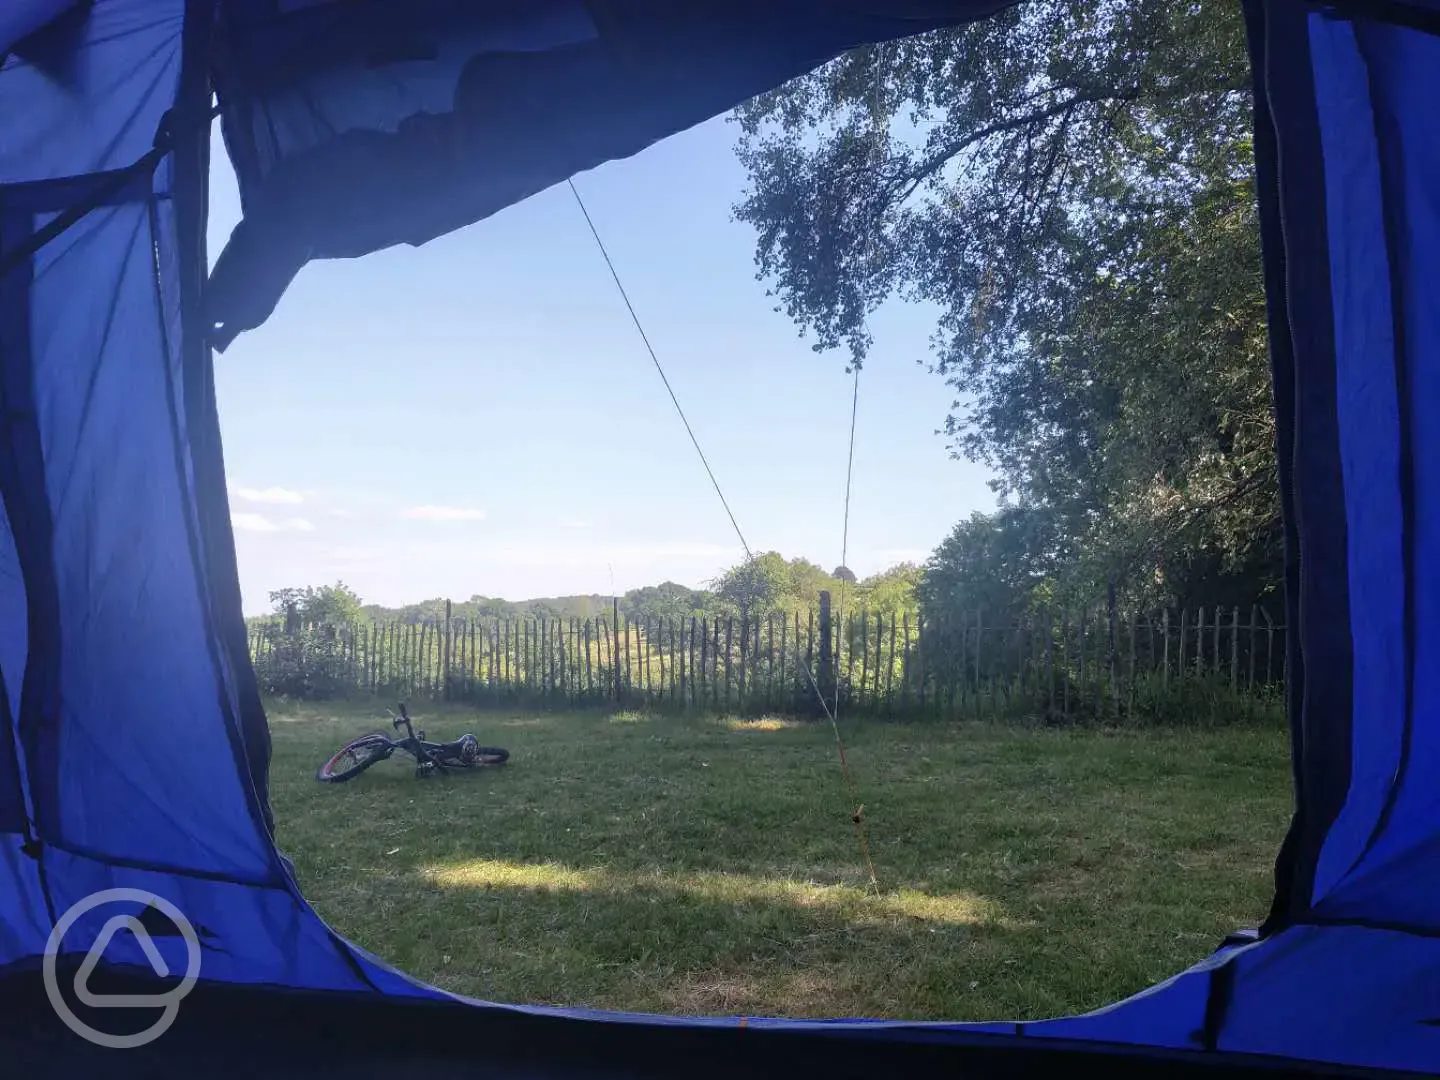 View from inside a tent